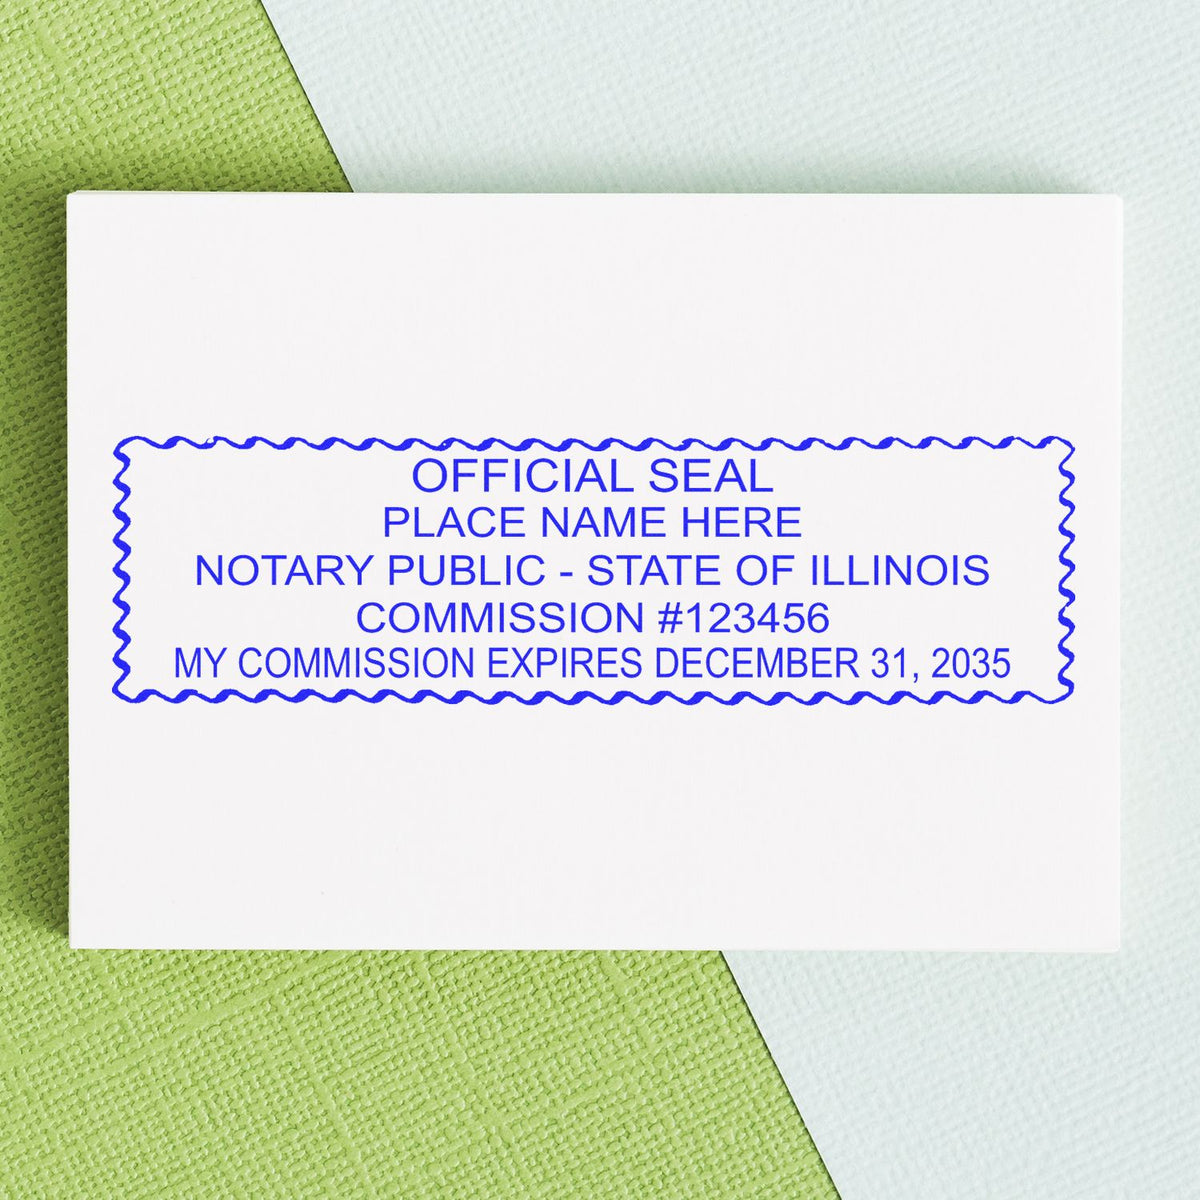 A stamped impression of the Super Slim Illinois Notary Public Stamp in this stylish lifestyle photo, setting the tone for a unique and personalized product.